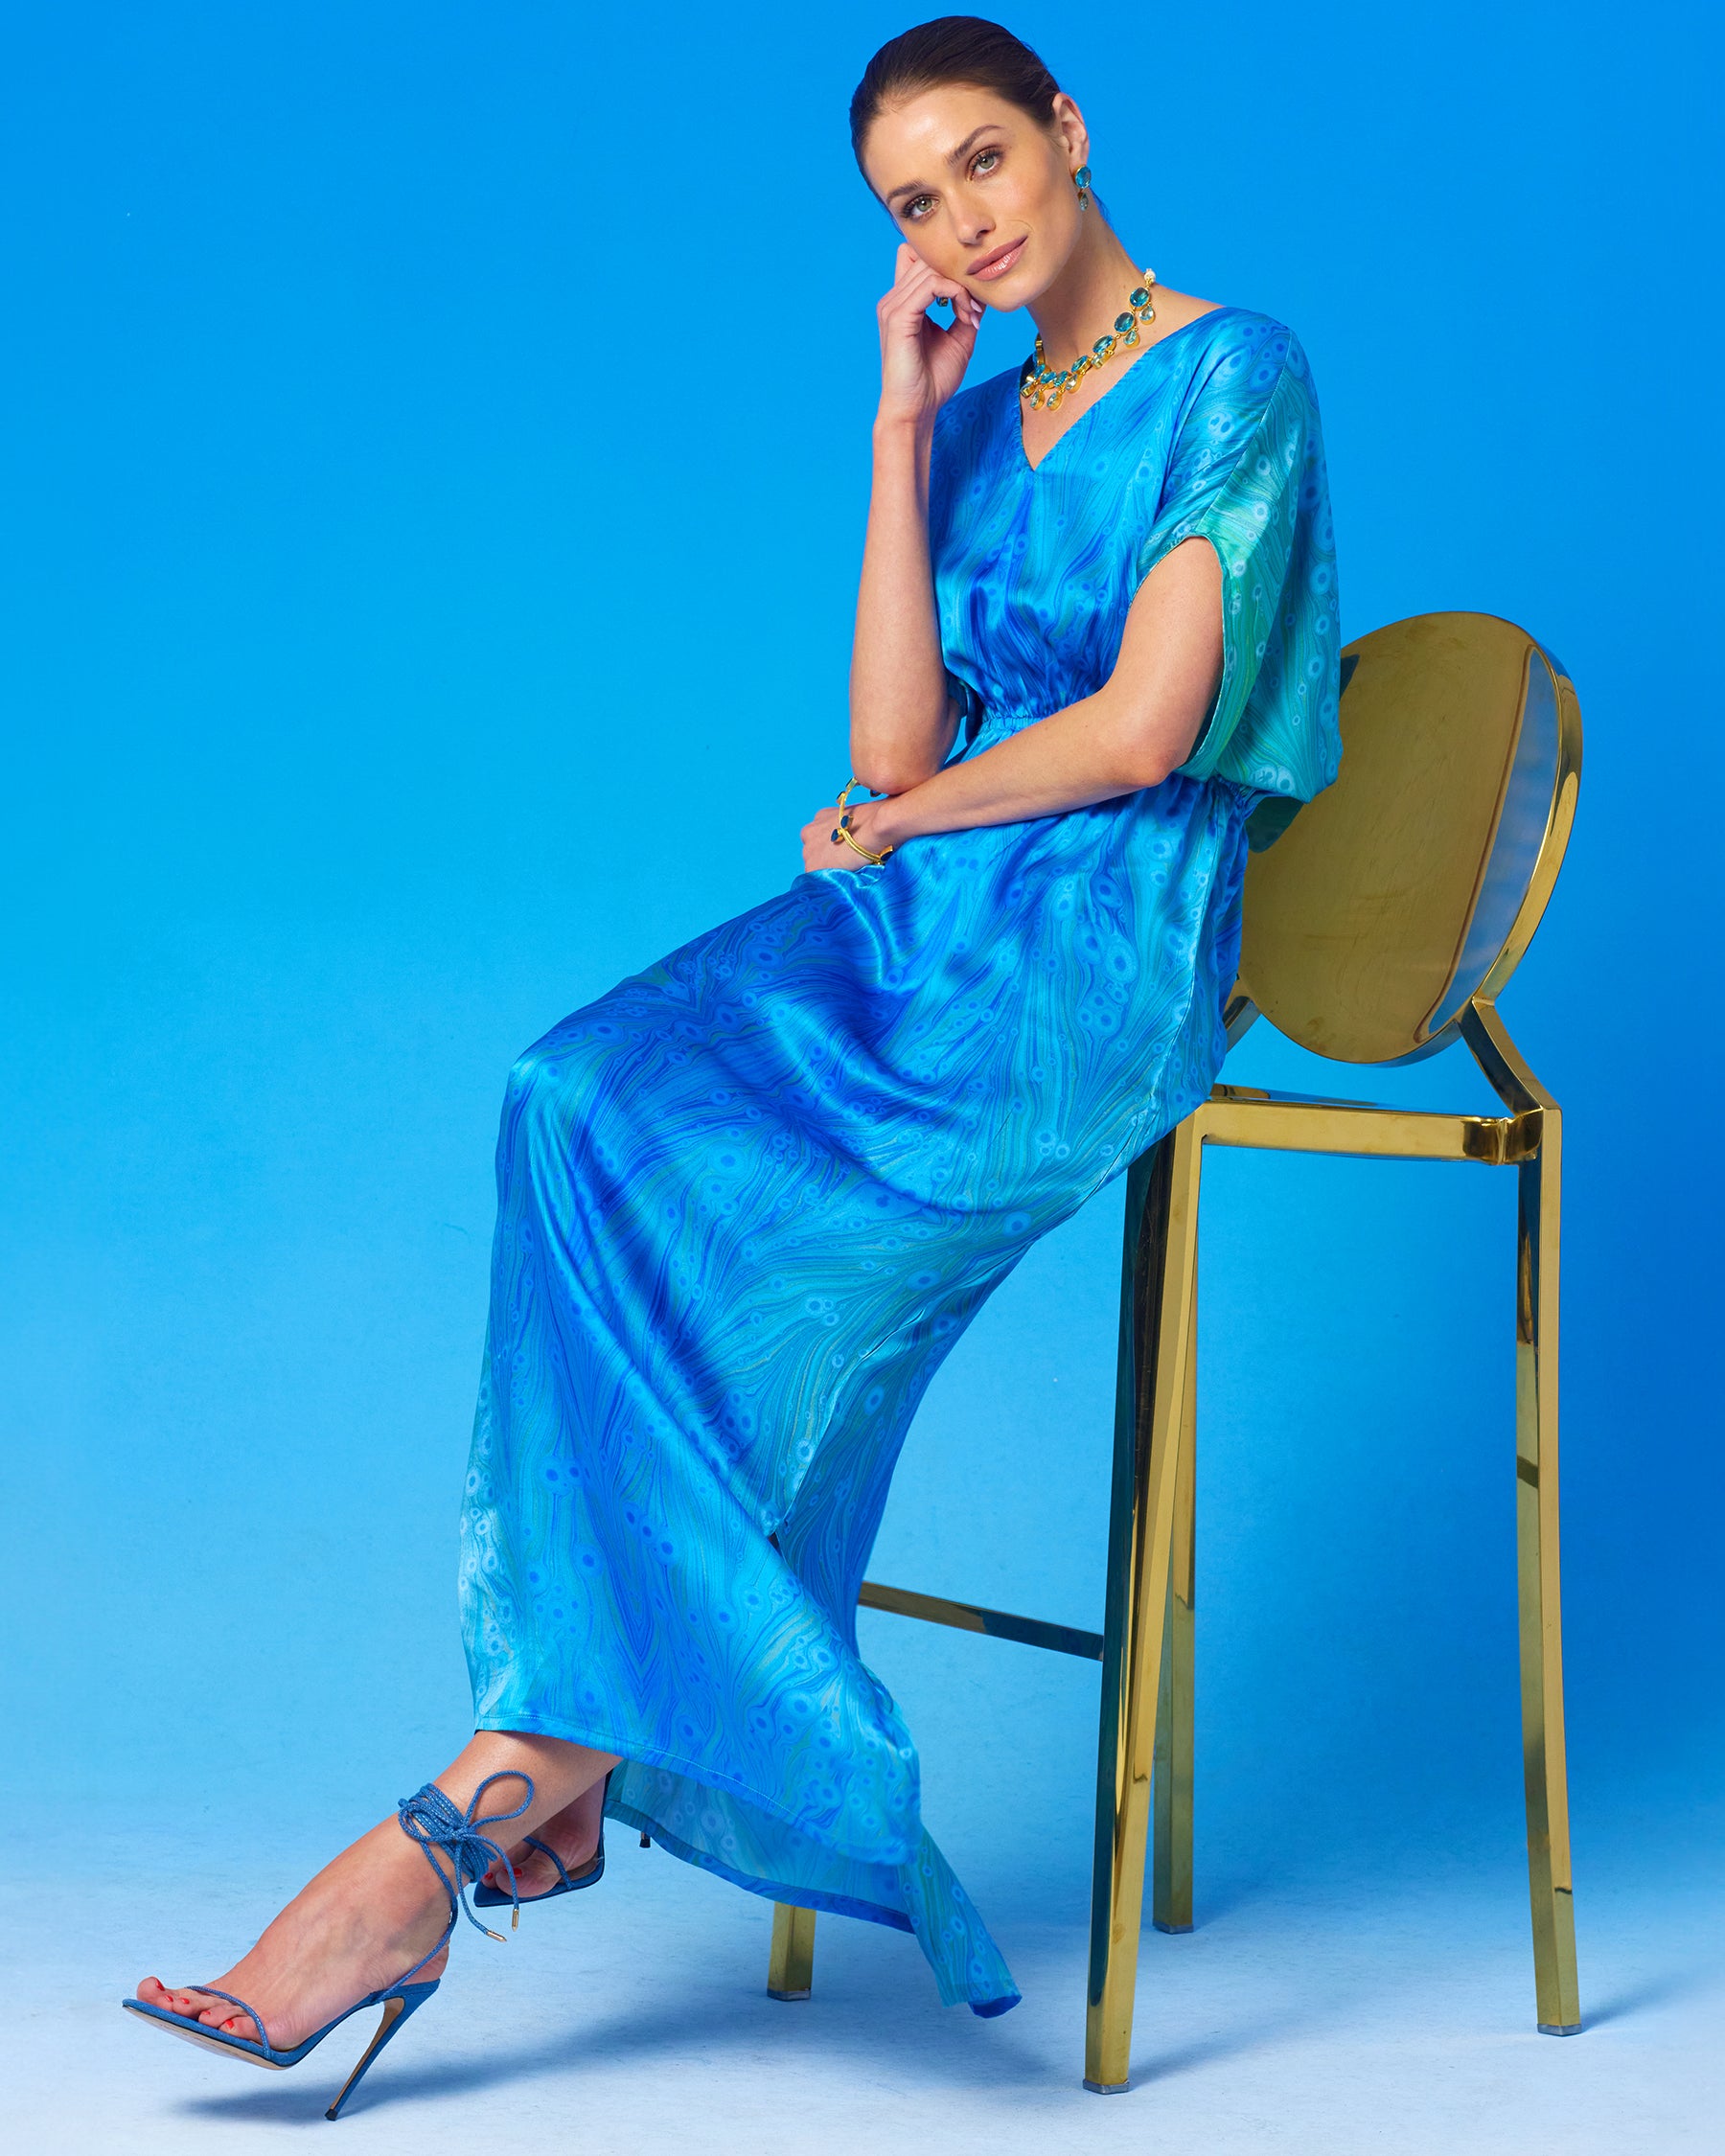 Calliope Long Silk Dress in Sea Nymph Blues witting on a gold chair